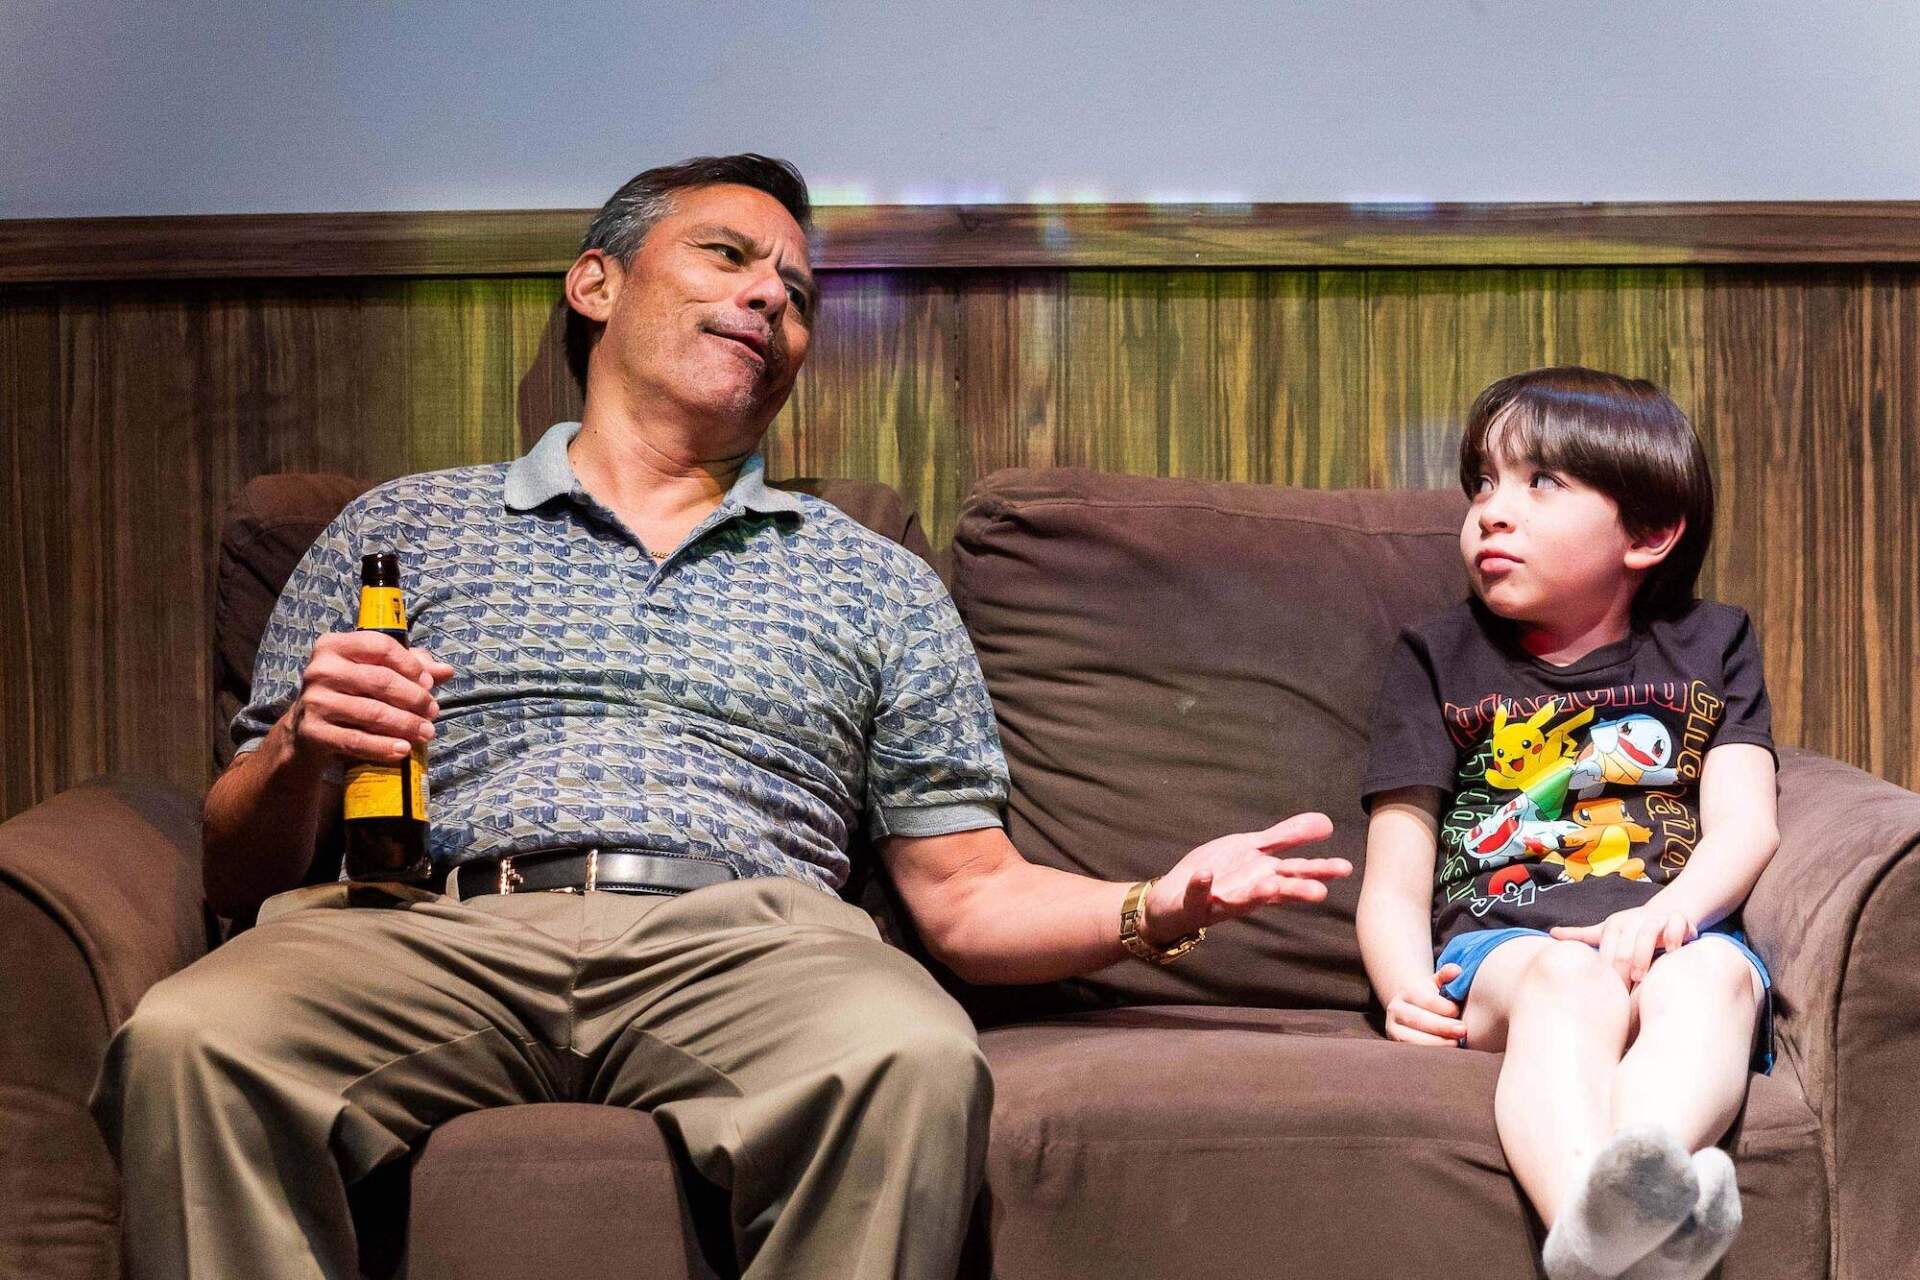 Jorge Alberto Rubio and Xavier Rosario as a younger version of his son in "Machine Learning" at Central Square Theater. (Courtesy Nile Scott Studios)